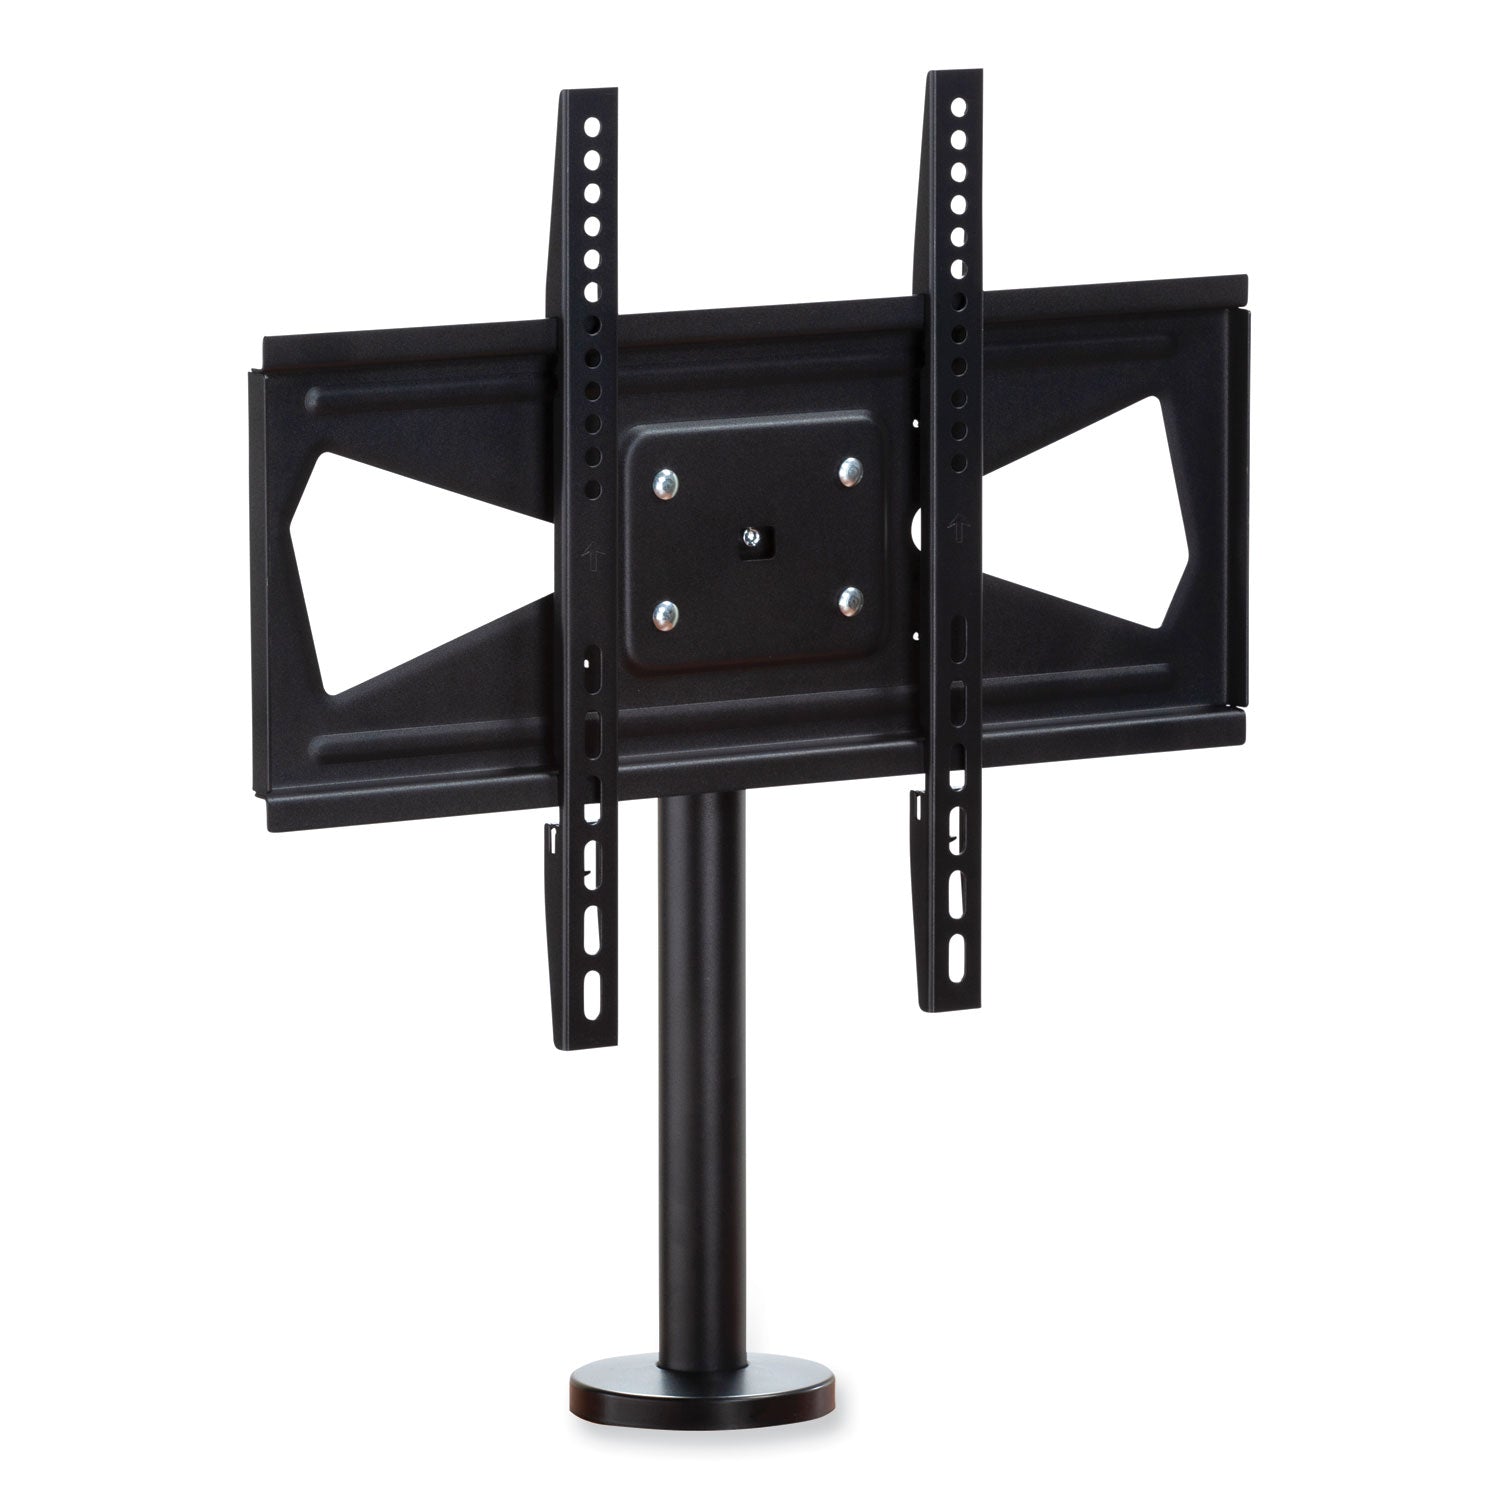 tabletop-tv-mount-2125-x-2475-x-2475-black-supports-50-lbs-ships-in-1-3-business-days_saf2144bl - 1